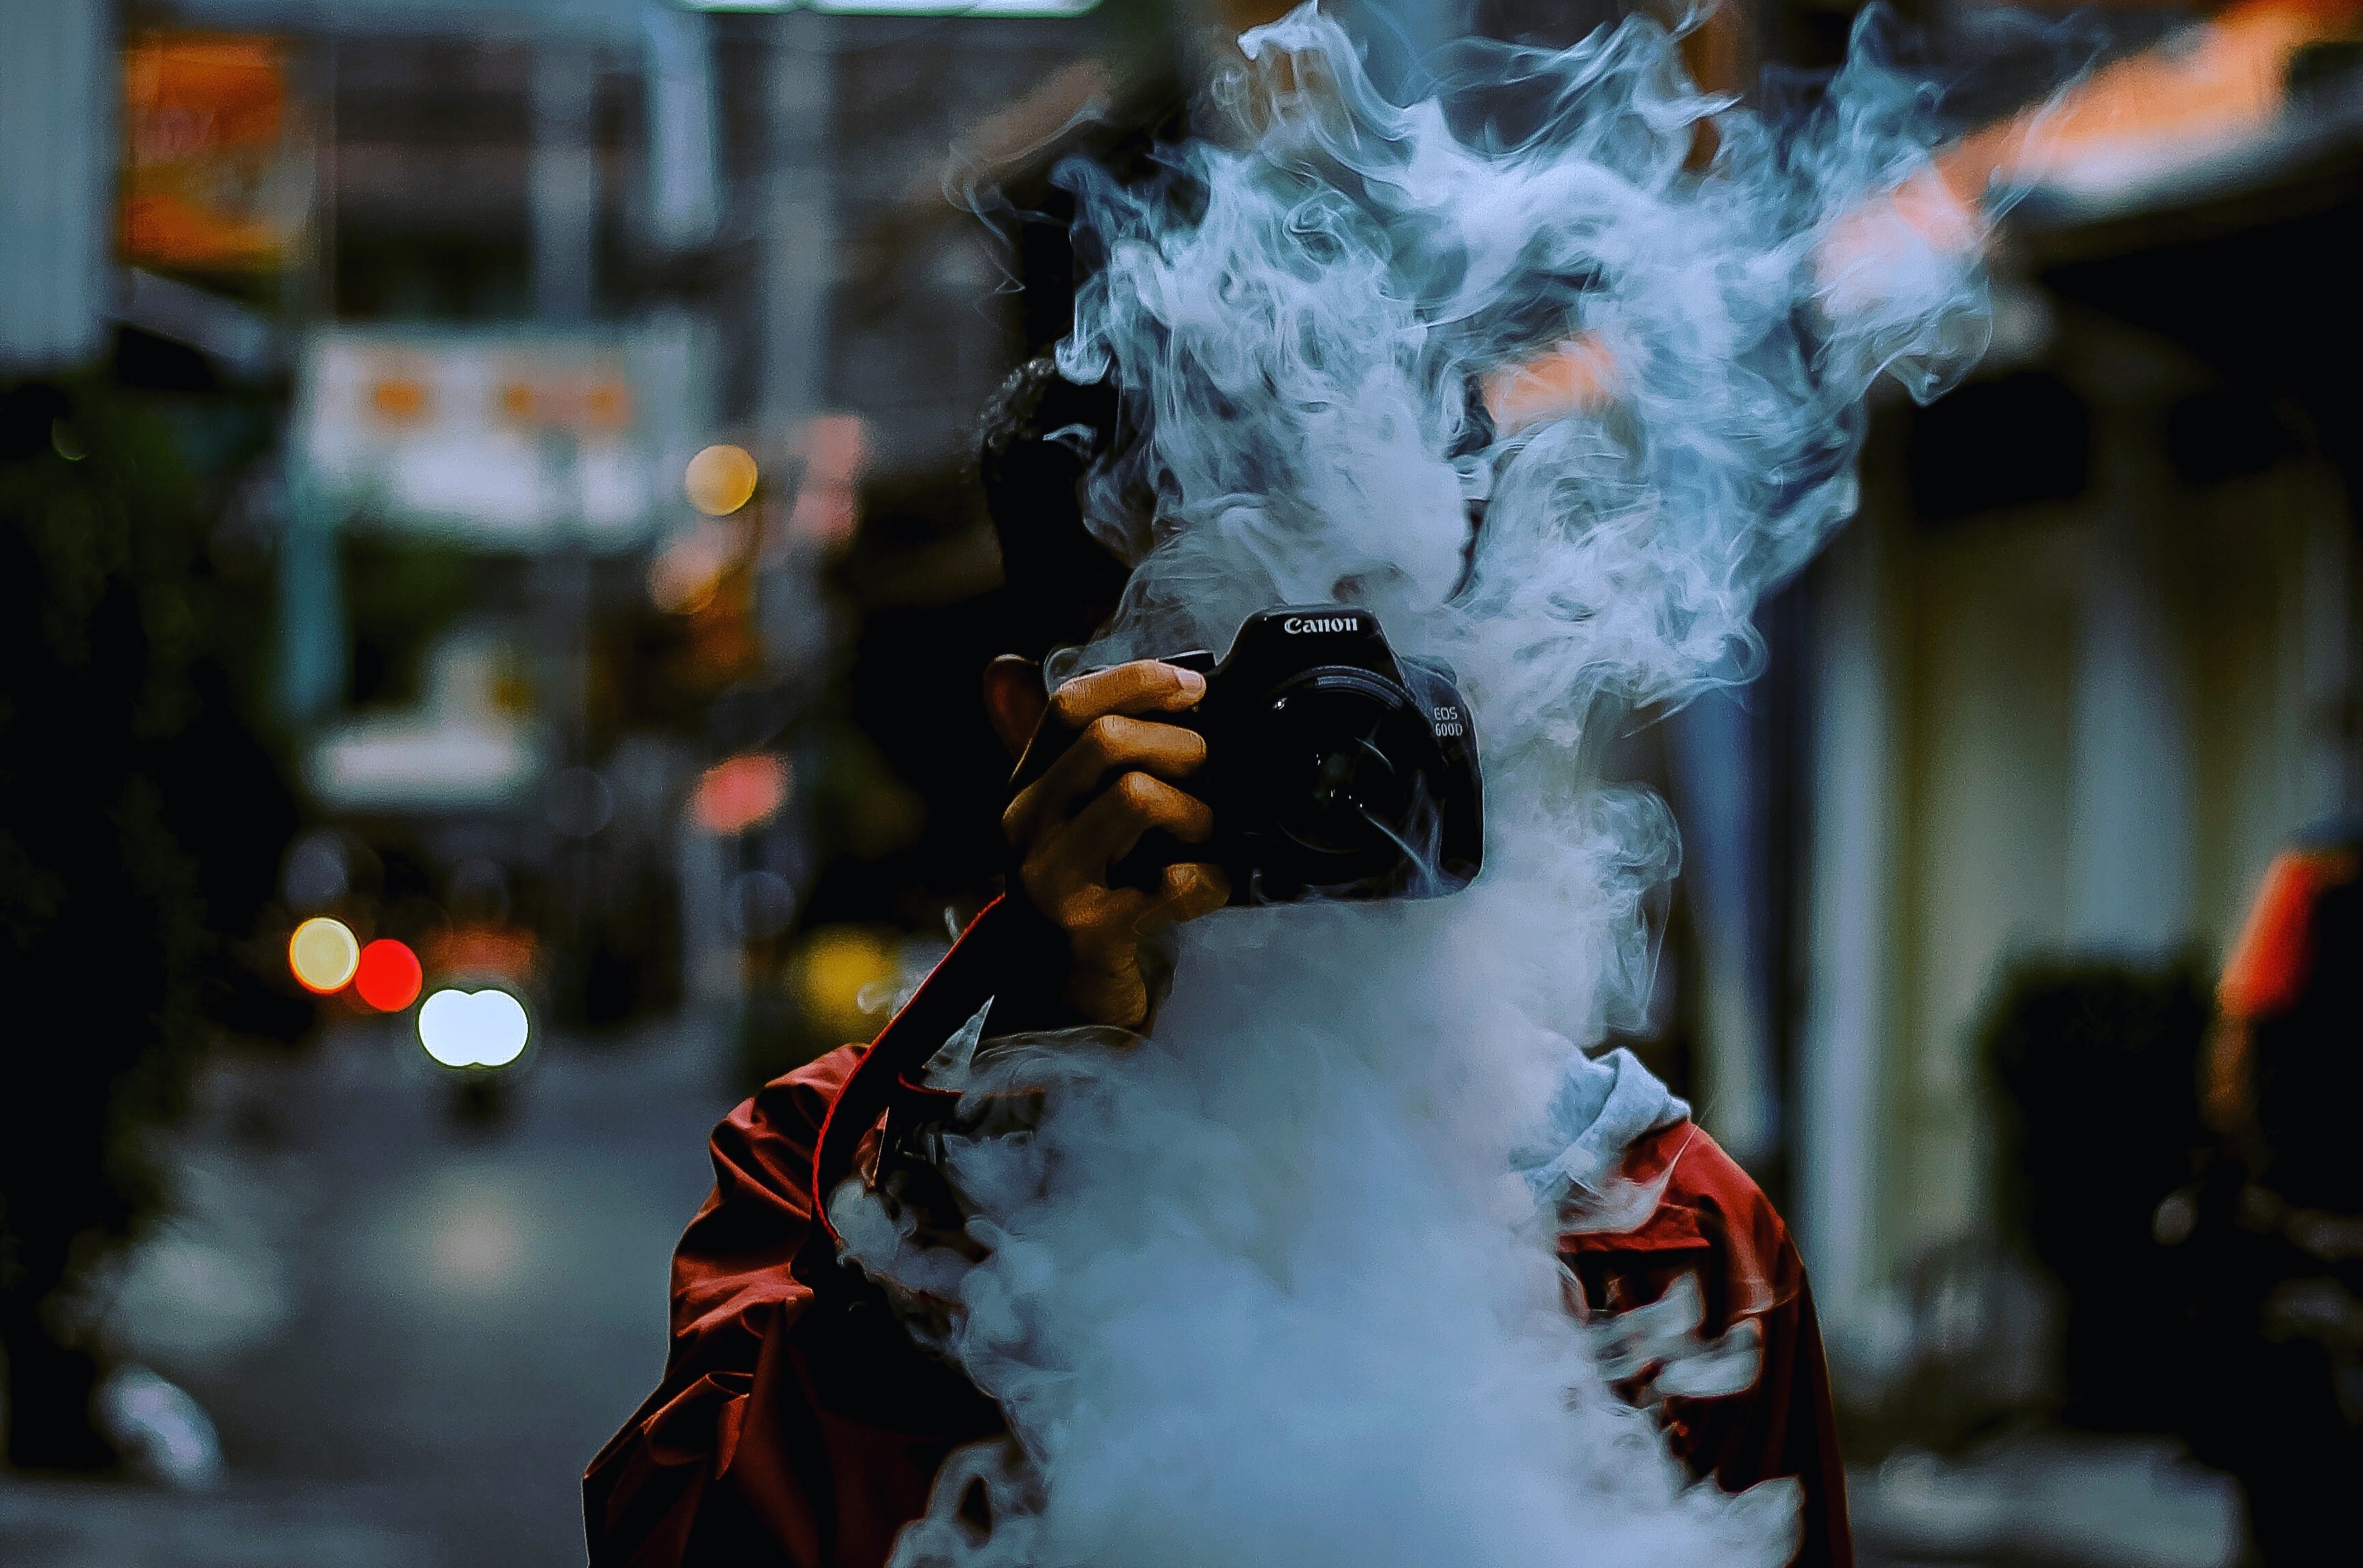 How Does Air Pollution Compare to Smoking Cigarettes?